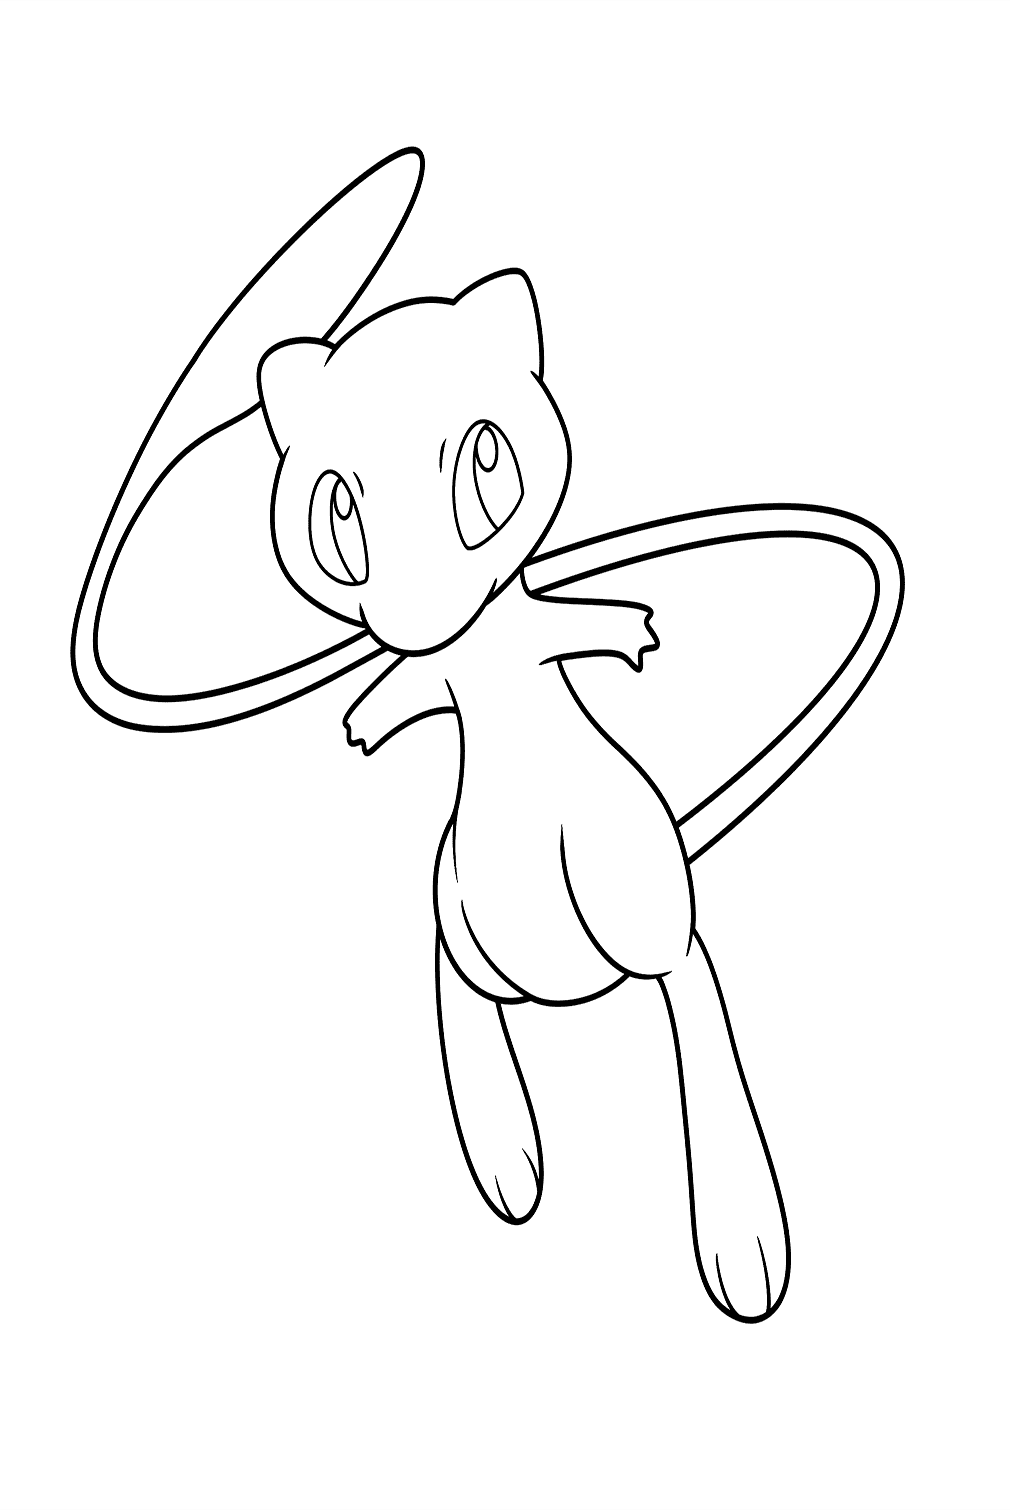 Mew Coloring Page For Preschool from Mew